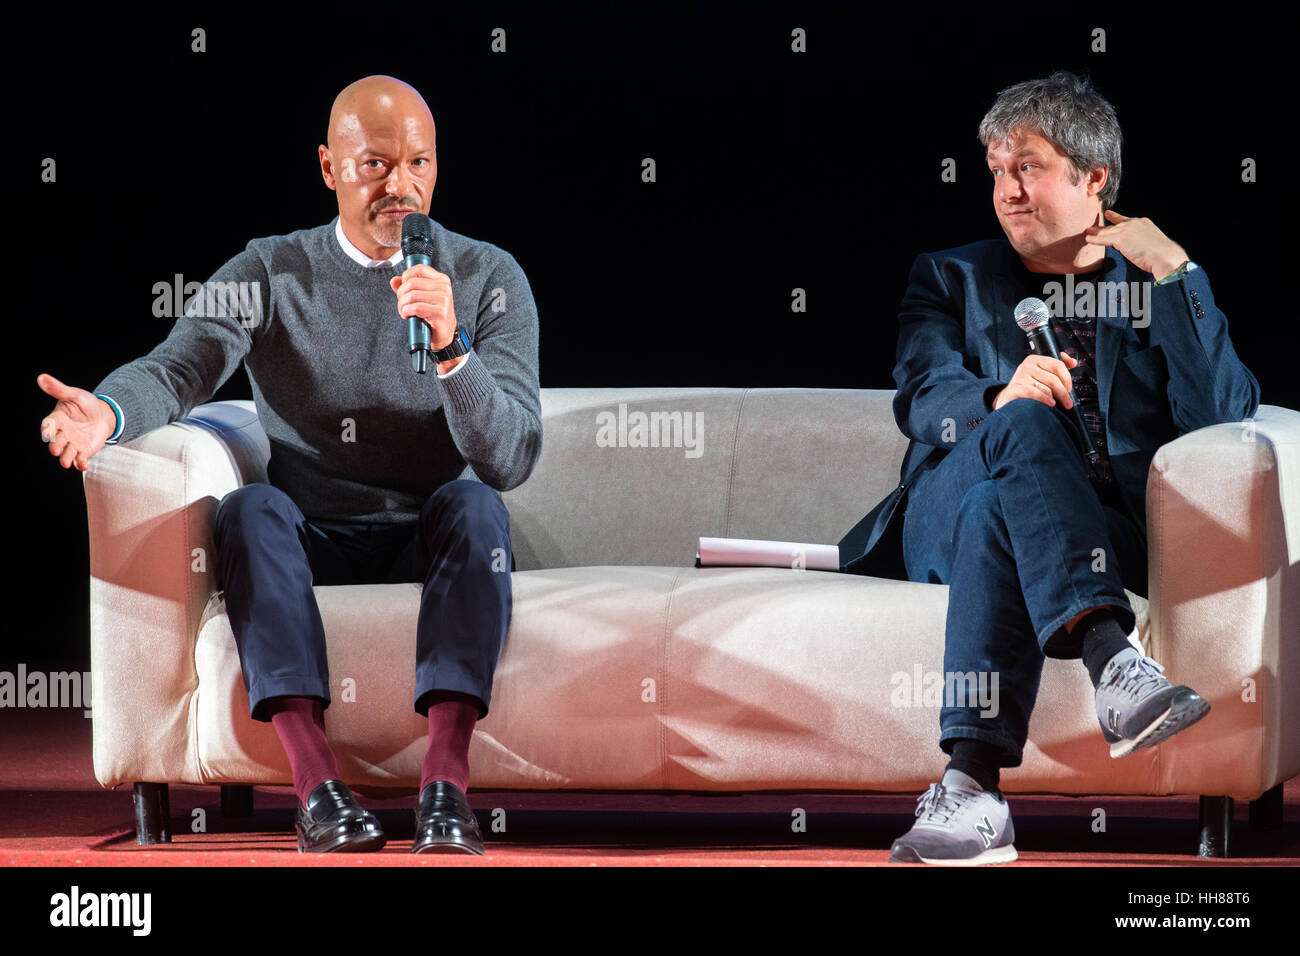 Moscow, Russia. 17th Jan, 2017. Film director Fyodor Bondarchuk(left) and film critic Anton Dolin(right) at the lecture 'The attraction: Under the sign of secrecy' in the cinema 'October'. Credit: Victor Vytolskiy/Alamy Live News Stock Photo